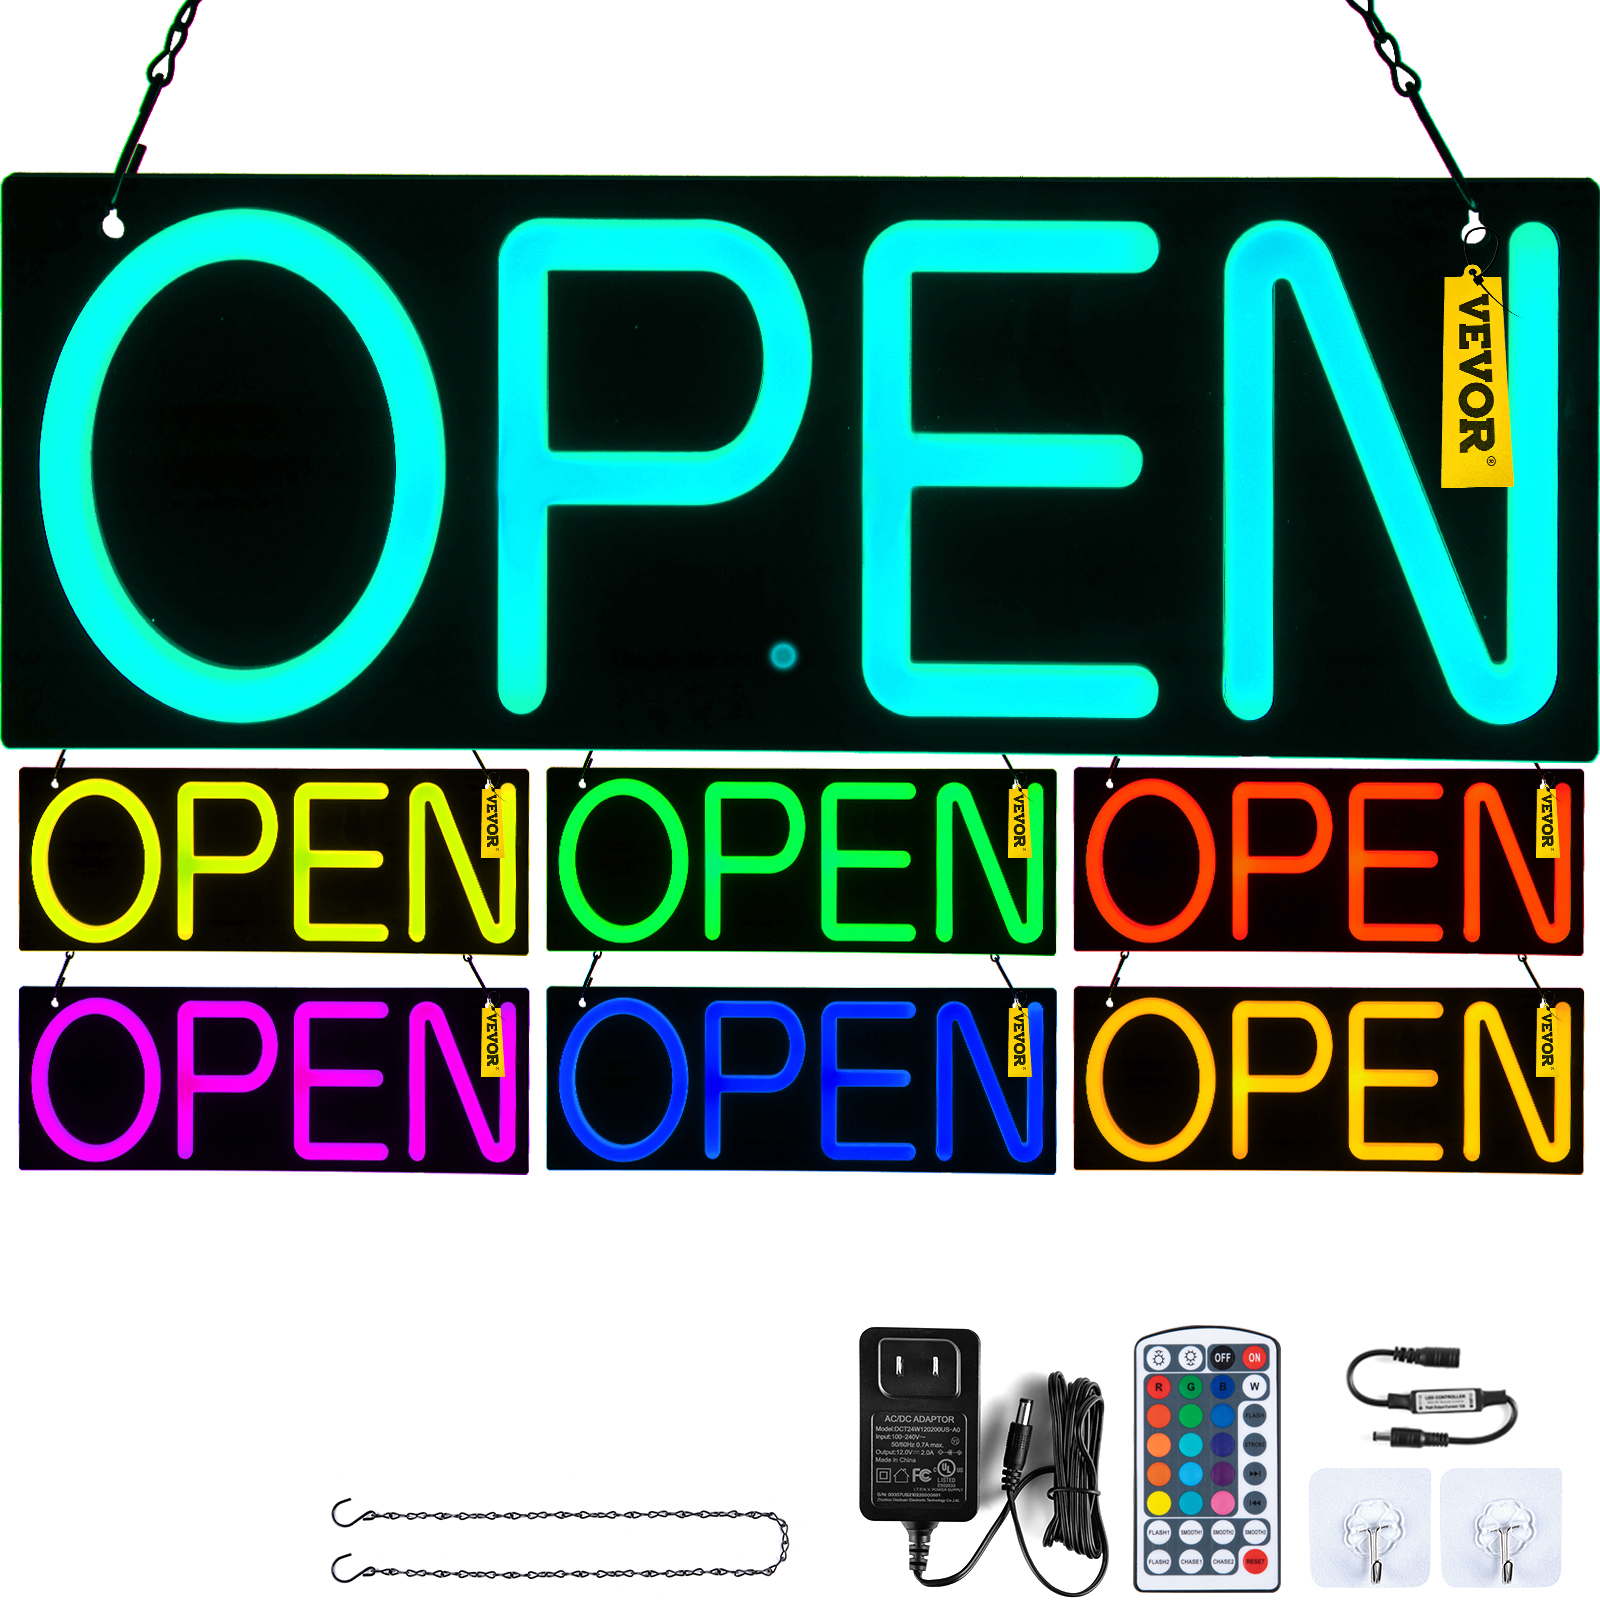 LED Open Neon Sign PVC Advertising Board Electric Lighted Display Wall Art Light 